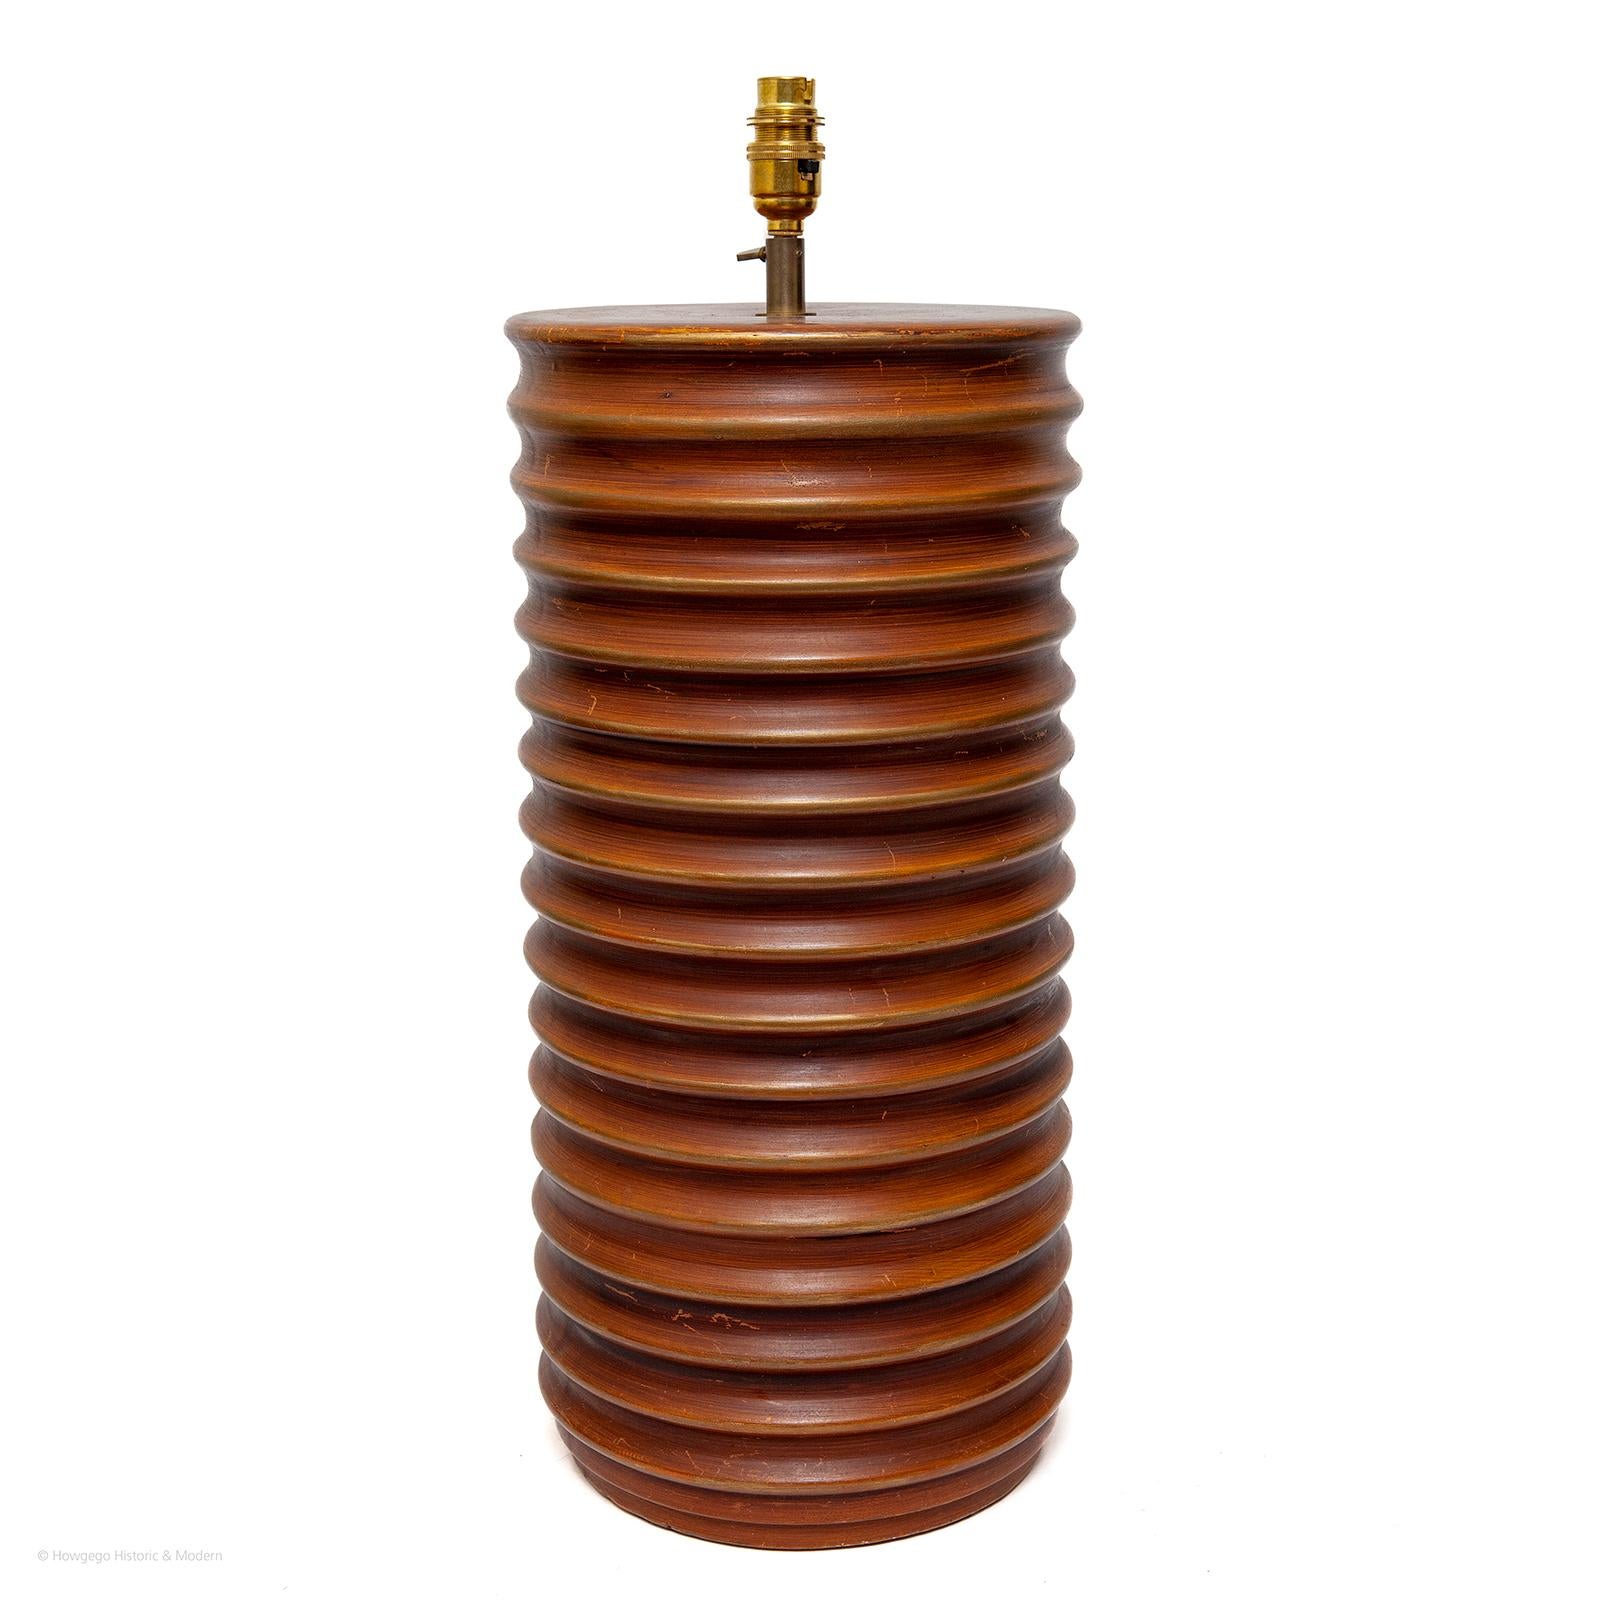 Vintage, Spanish, ring turned, pottery table lamp with a red ochre, earth tone glaze, 19½ high

Bold and elegant with a naturalistic, earth aesthetic. 
The conversion is recent so it conforms to UK PAT Electrical standards.
Pricing £